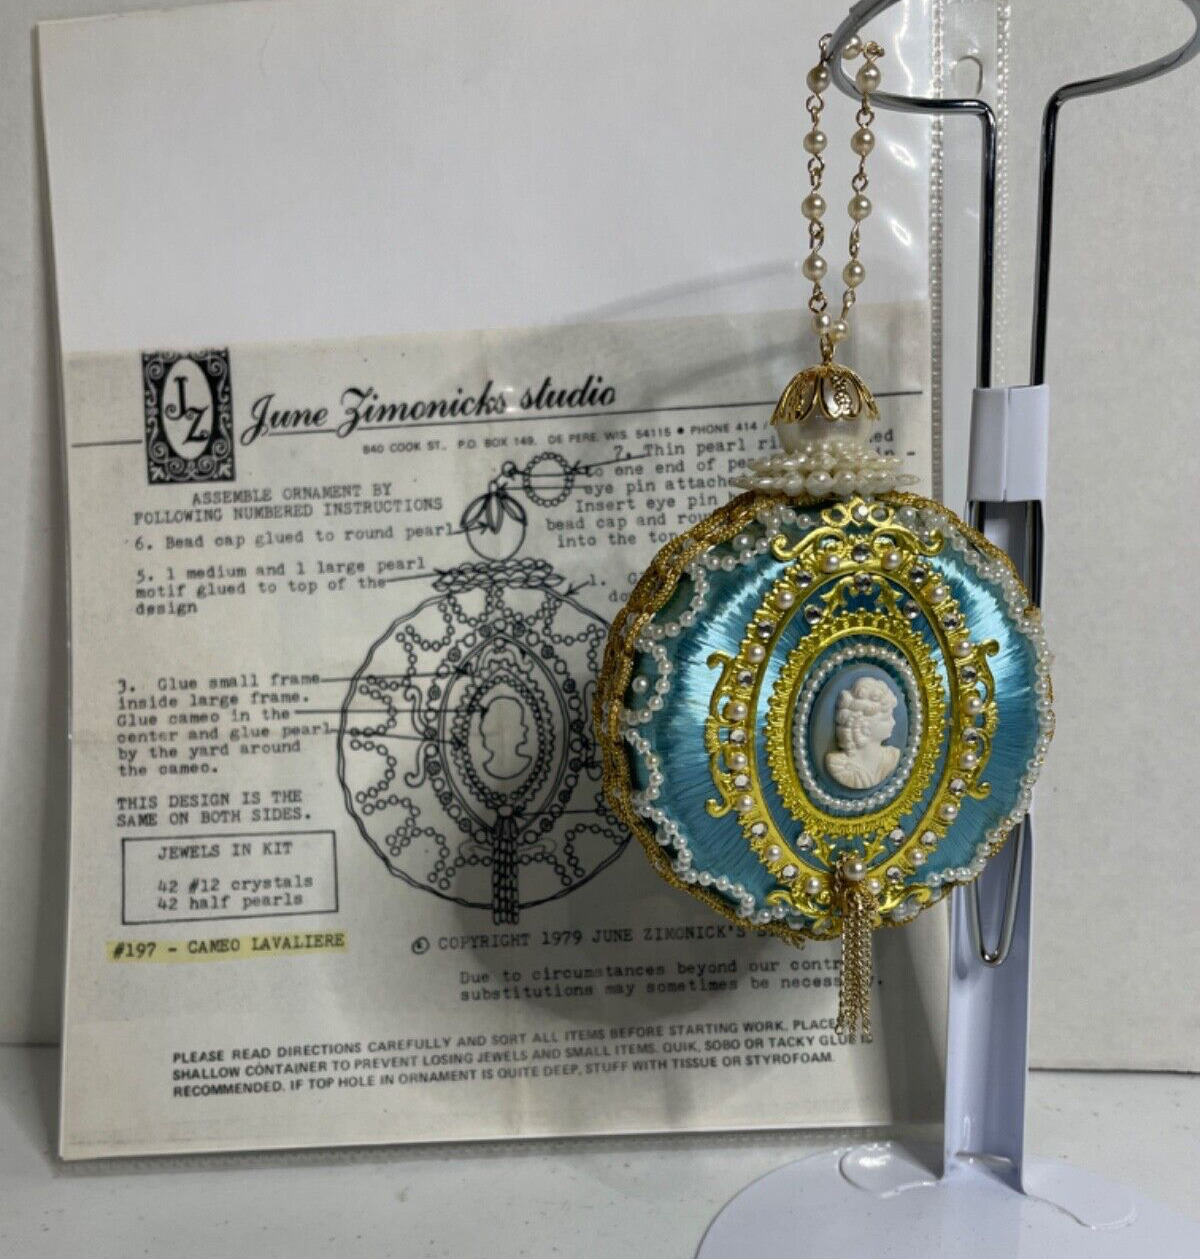 JUNE ZIMONICK CAMEO LAVALIERE COMPLETED ORNAMENT 1979 #197